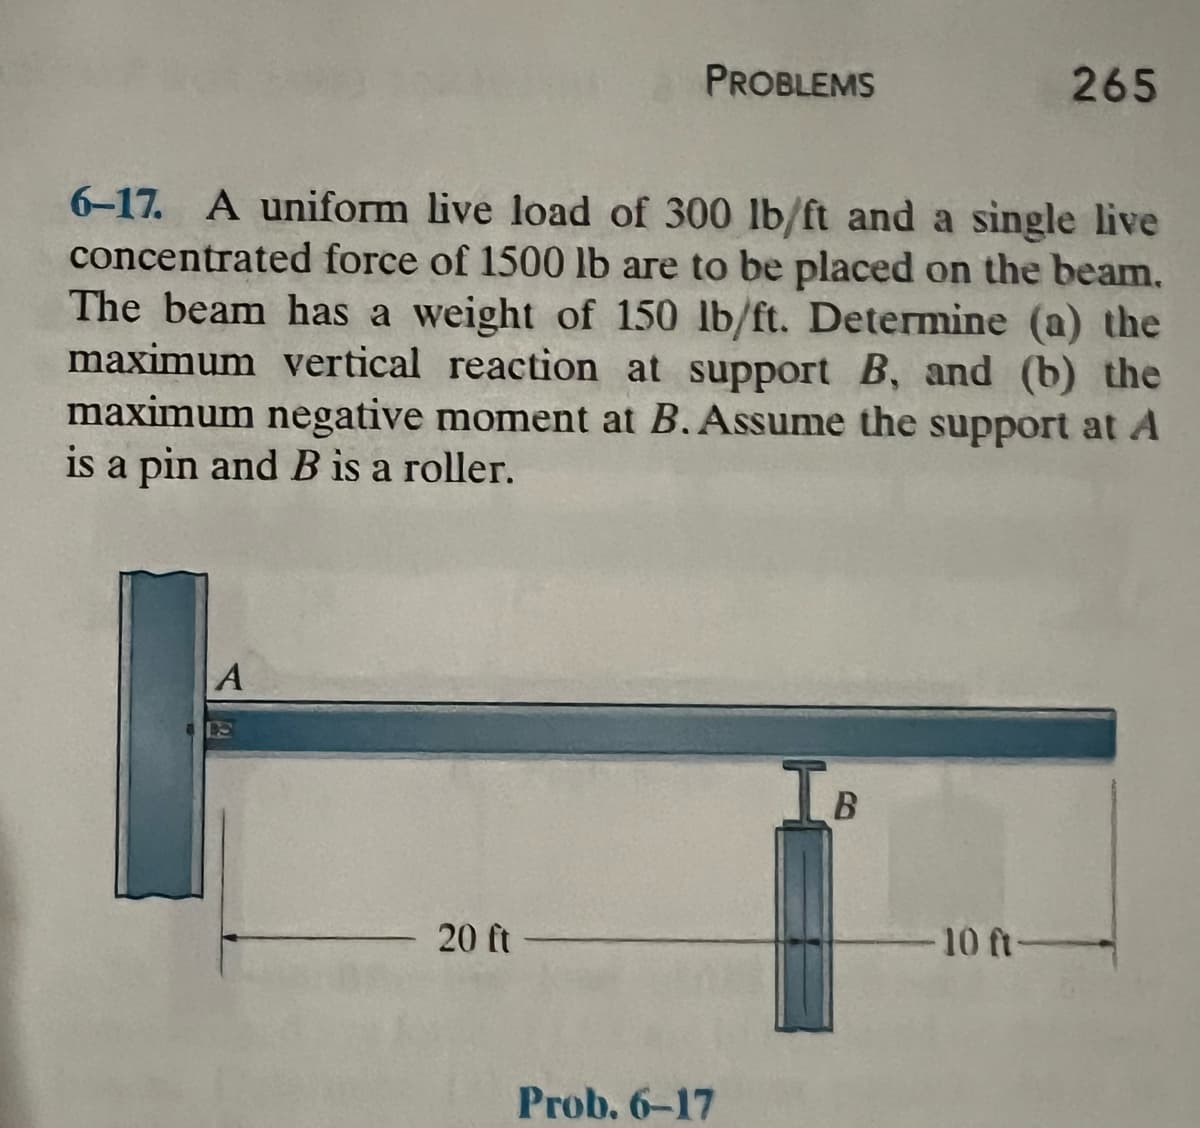 A
PROBLEMS
6-17. A uniform live load of 300 lb/ft and a single live
concentrated force of 1500 lb are to be placed on the beam.
The beam has a weight of 150 lb/ft. Determine (a) the
maximum vertical reaction at support B, and (b) the
maximum negative moment at B. Assume the support at A
is a pin and B is a roller.
20 ft
Prob. 6-17
IB
265
-10 ft-